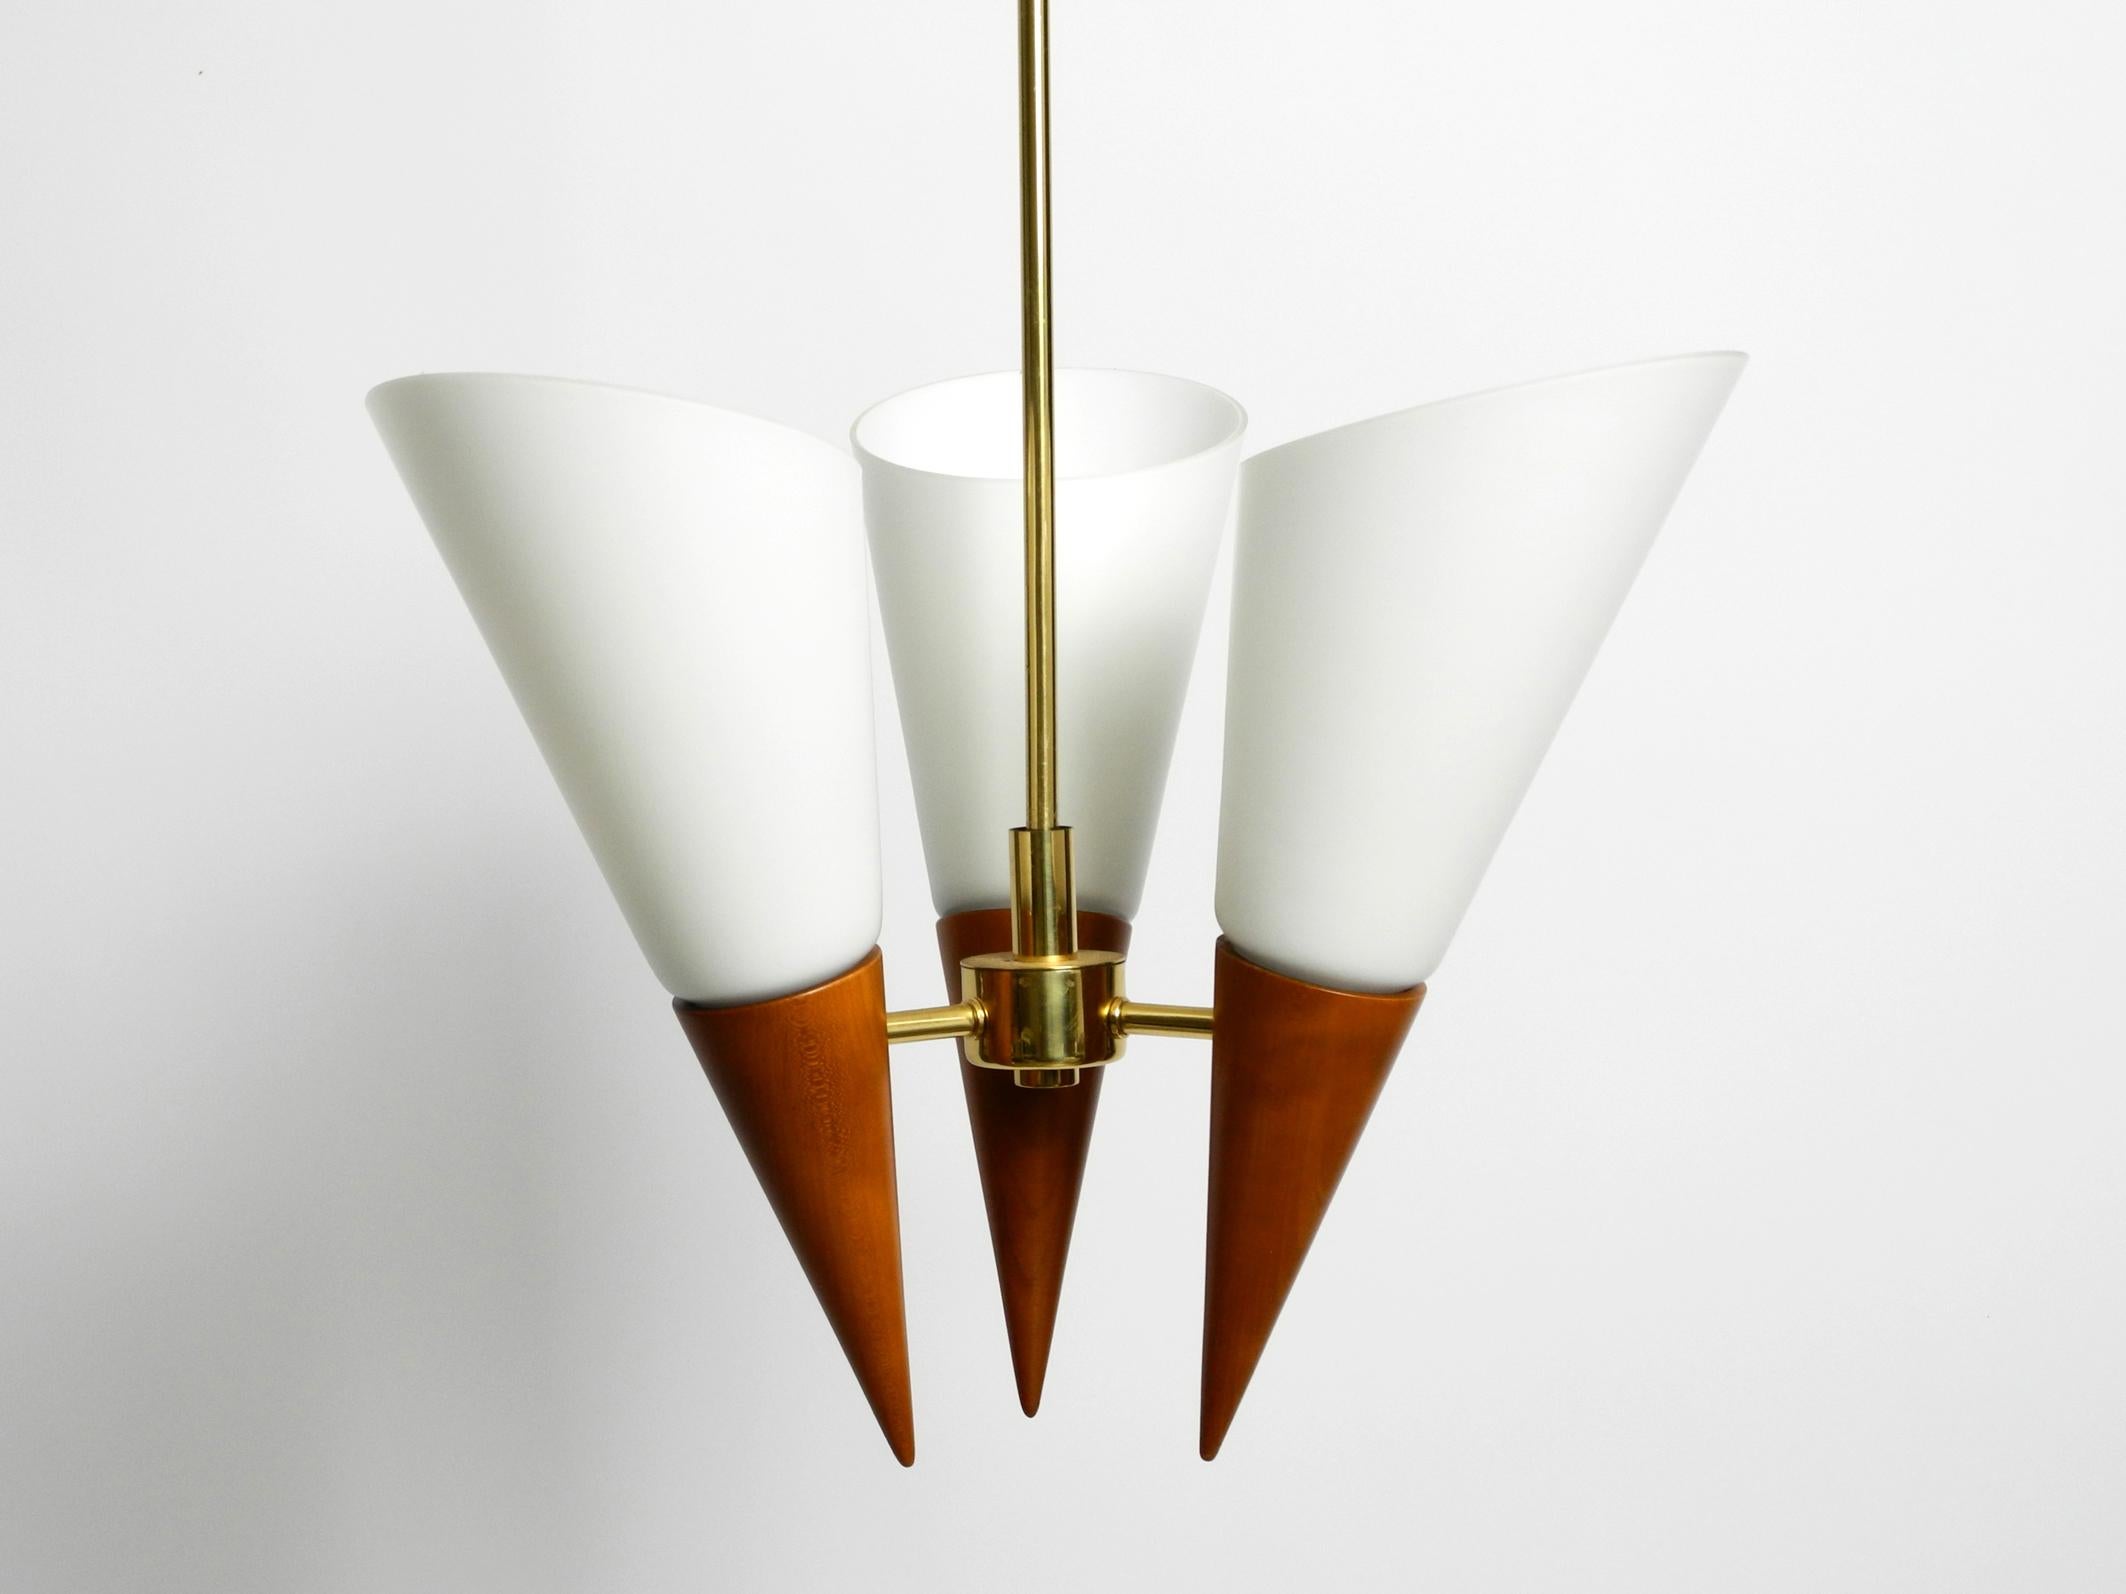 Beautiful 1960s ceiling lamp. Great elegant design. Made in Germany.
Brass frame, rod and canopy.
The cones are made of cherry wood. With large thick glass shades.
A very high quality lamp for a great enchanting lighting for any room.
All three